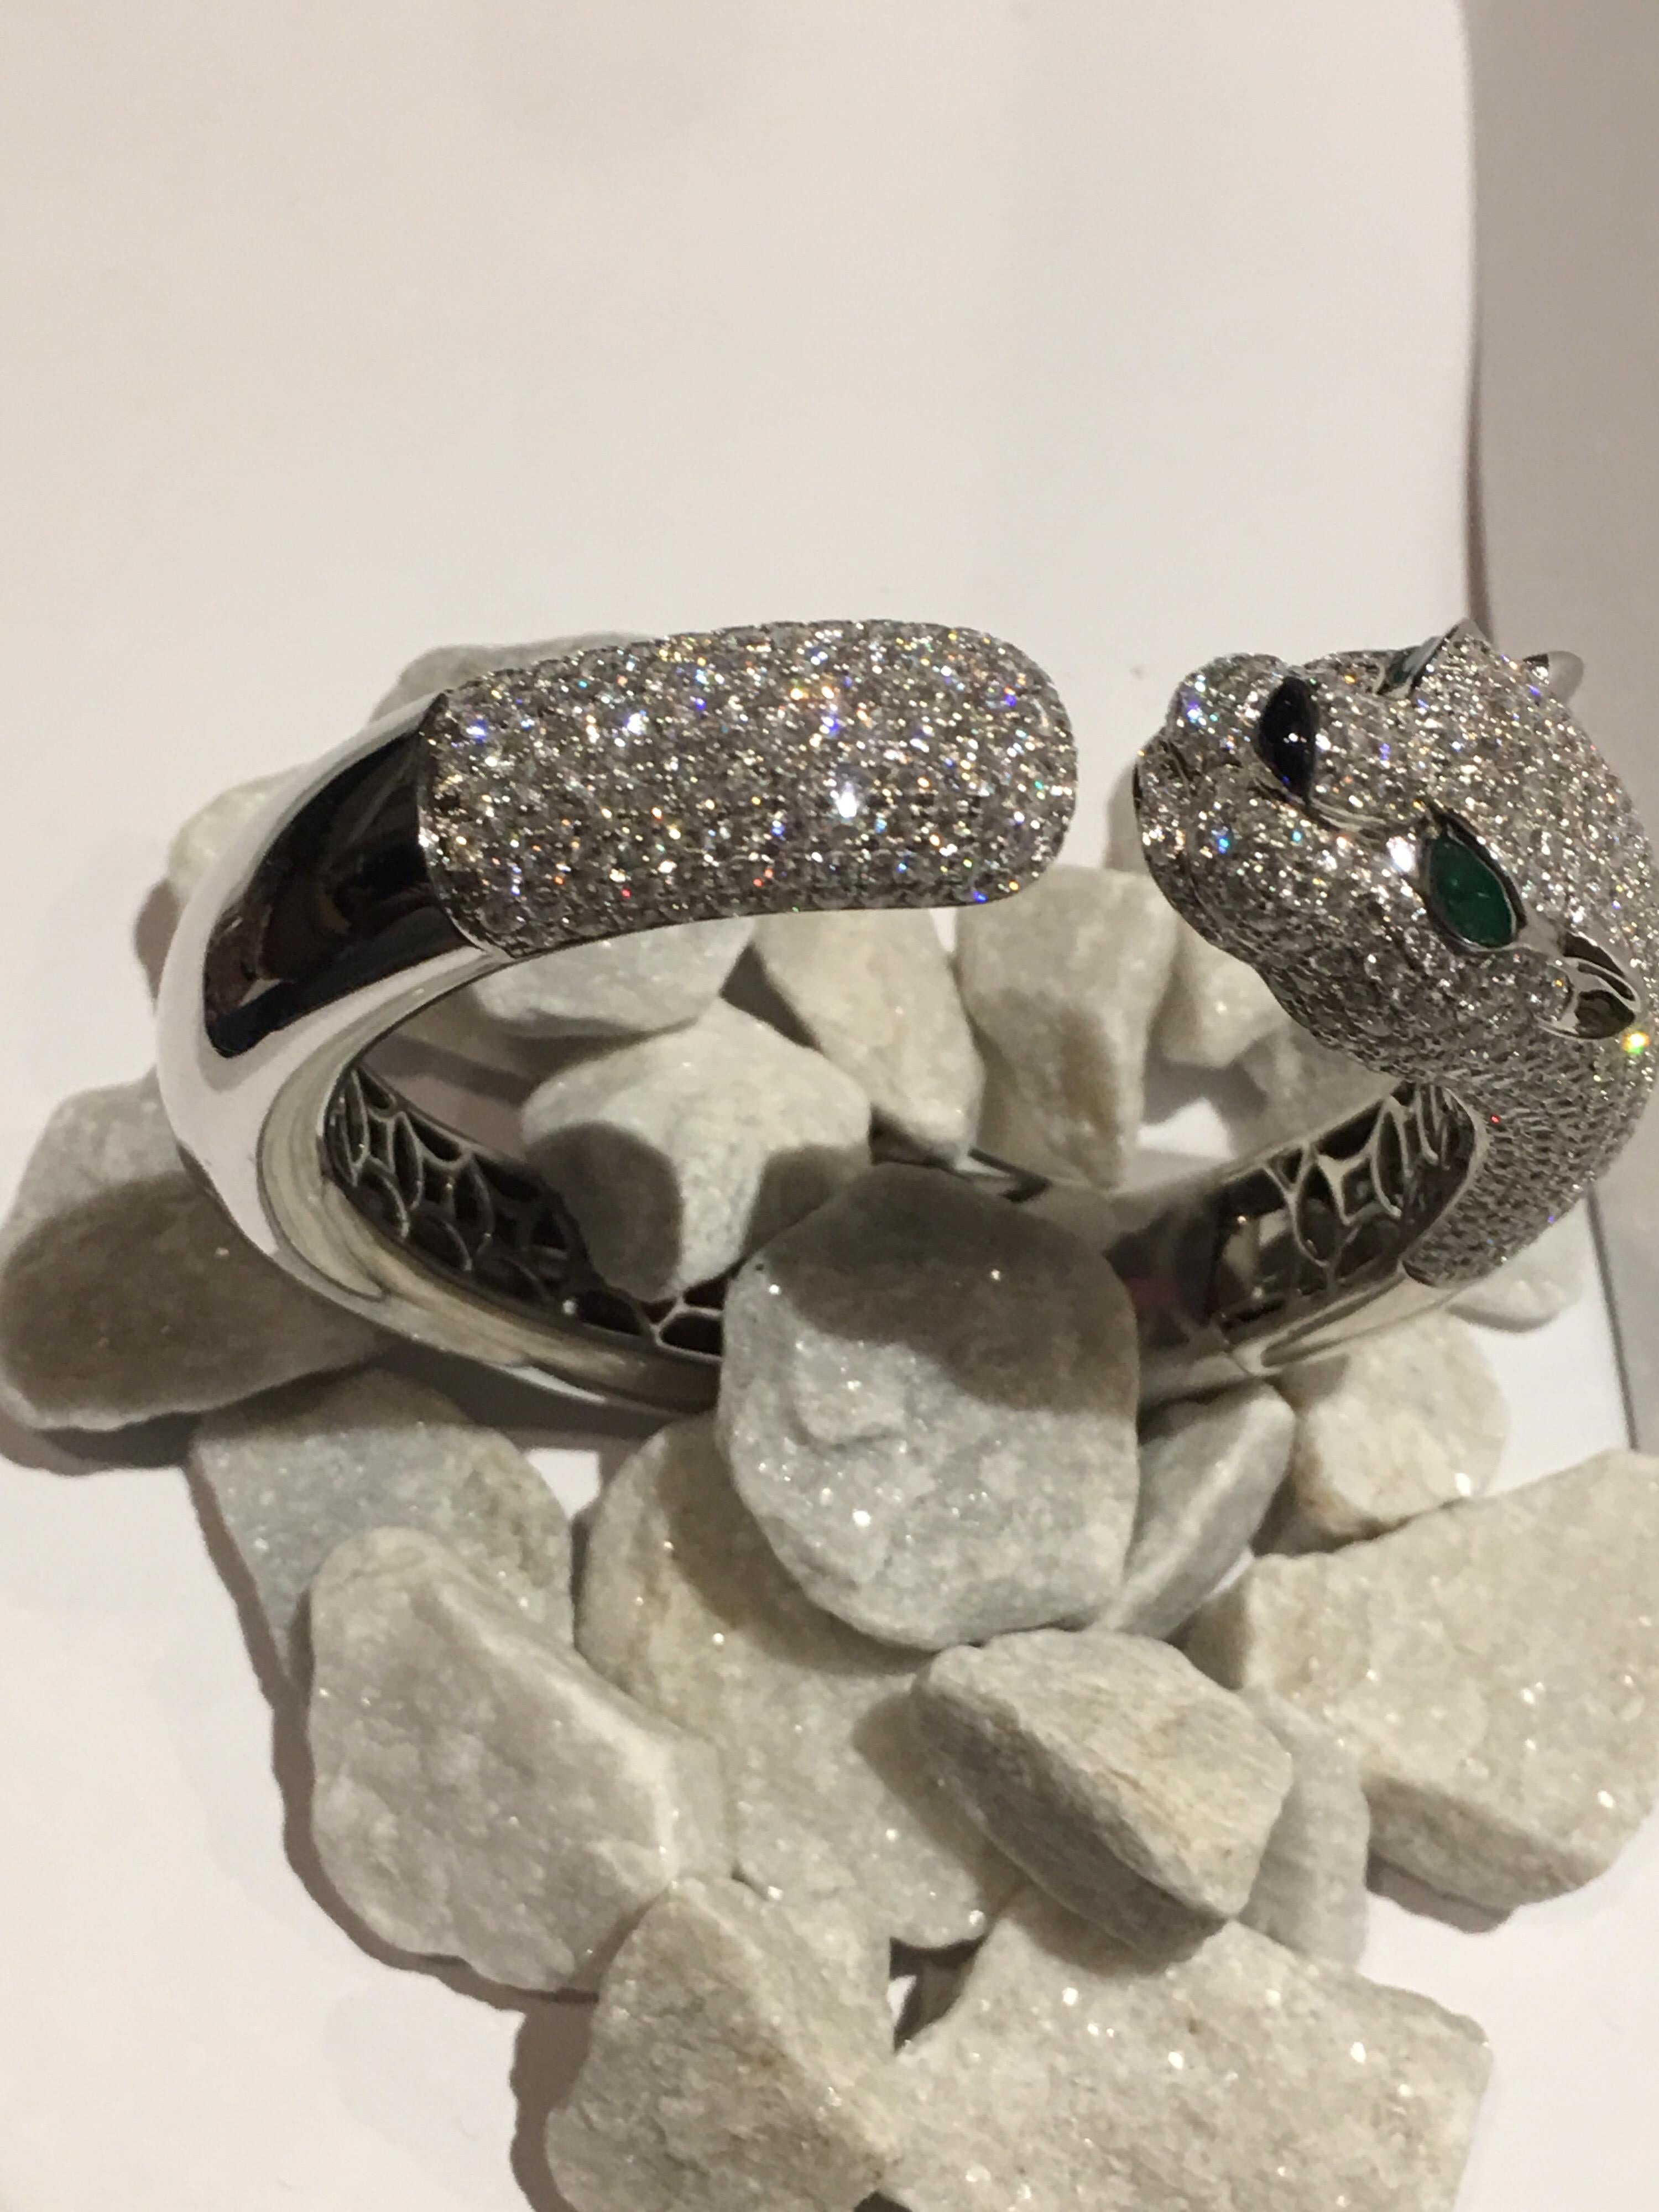 Panther Diamond Bangle set in 18K White gold. Total 10.40 Carat D Color VVS Diamond with 0.25 Carat Emerald.
Total Weight of Gold is 54.60 Gram.
Workmenship is exceptional.